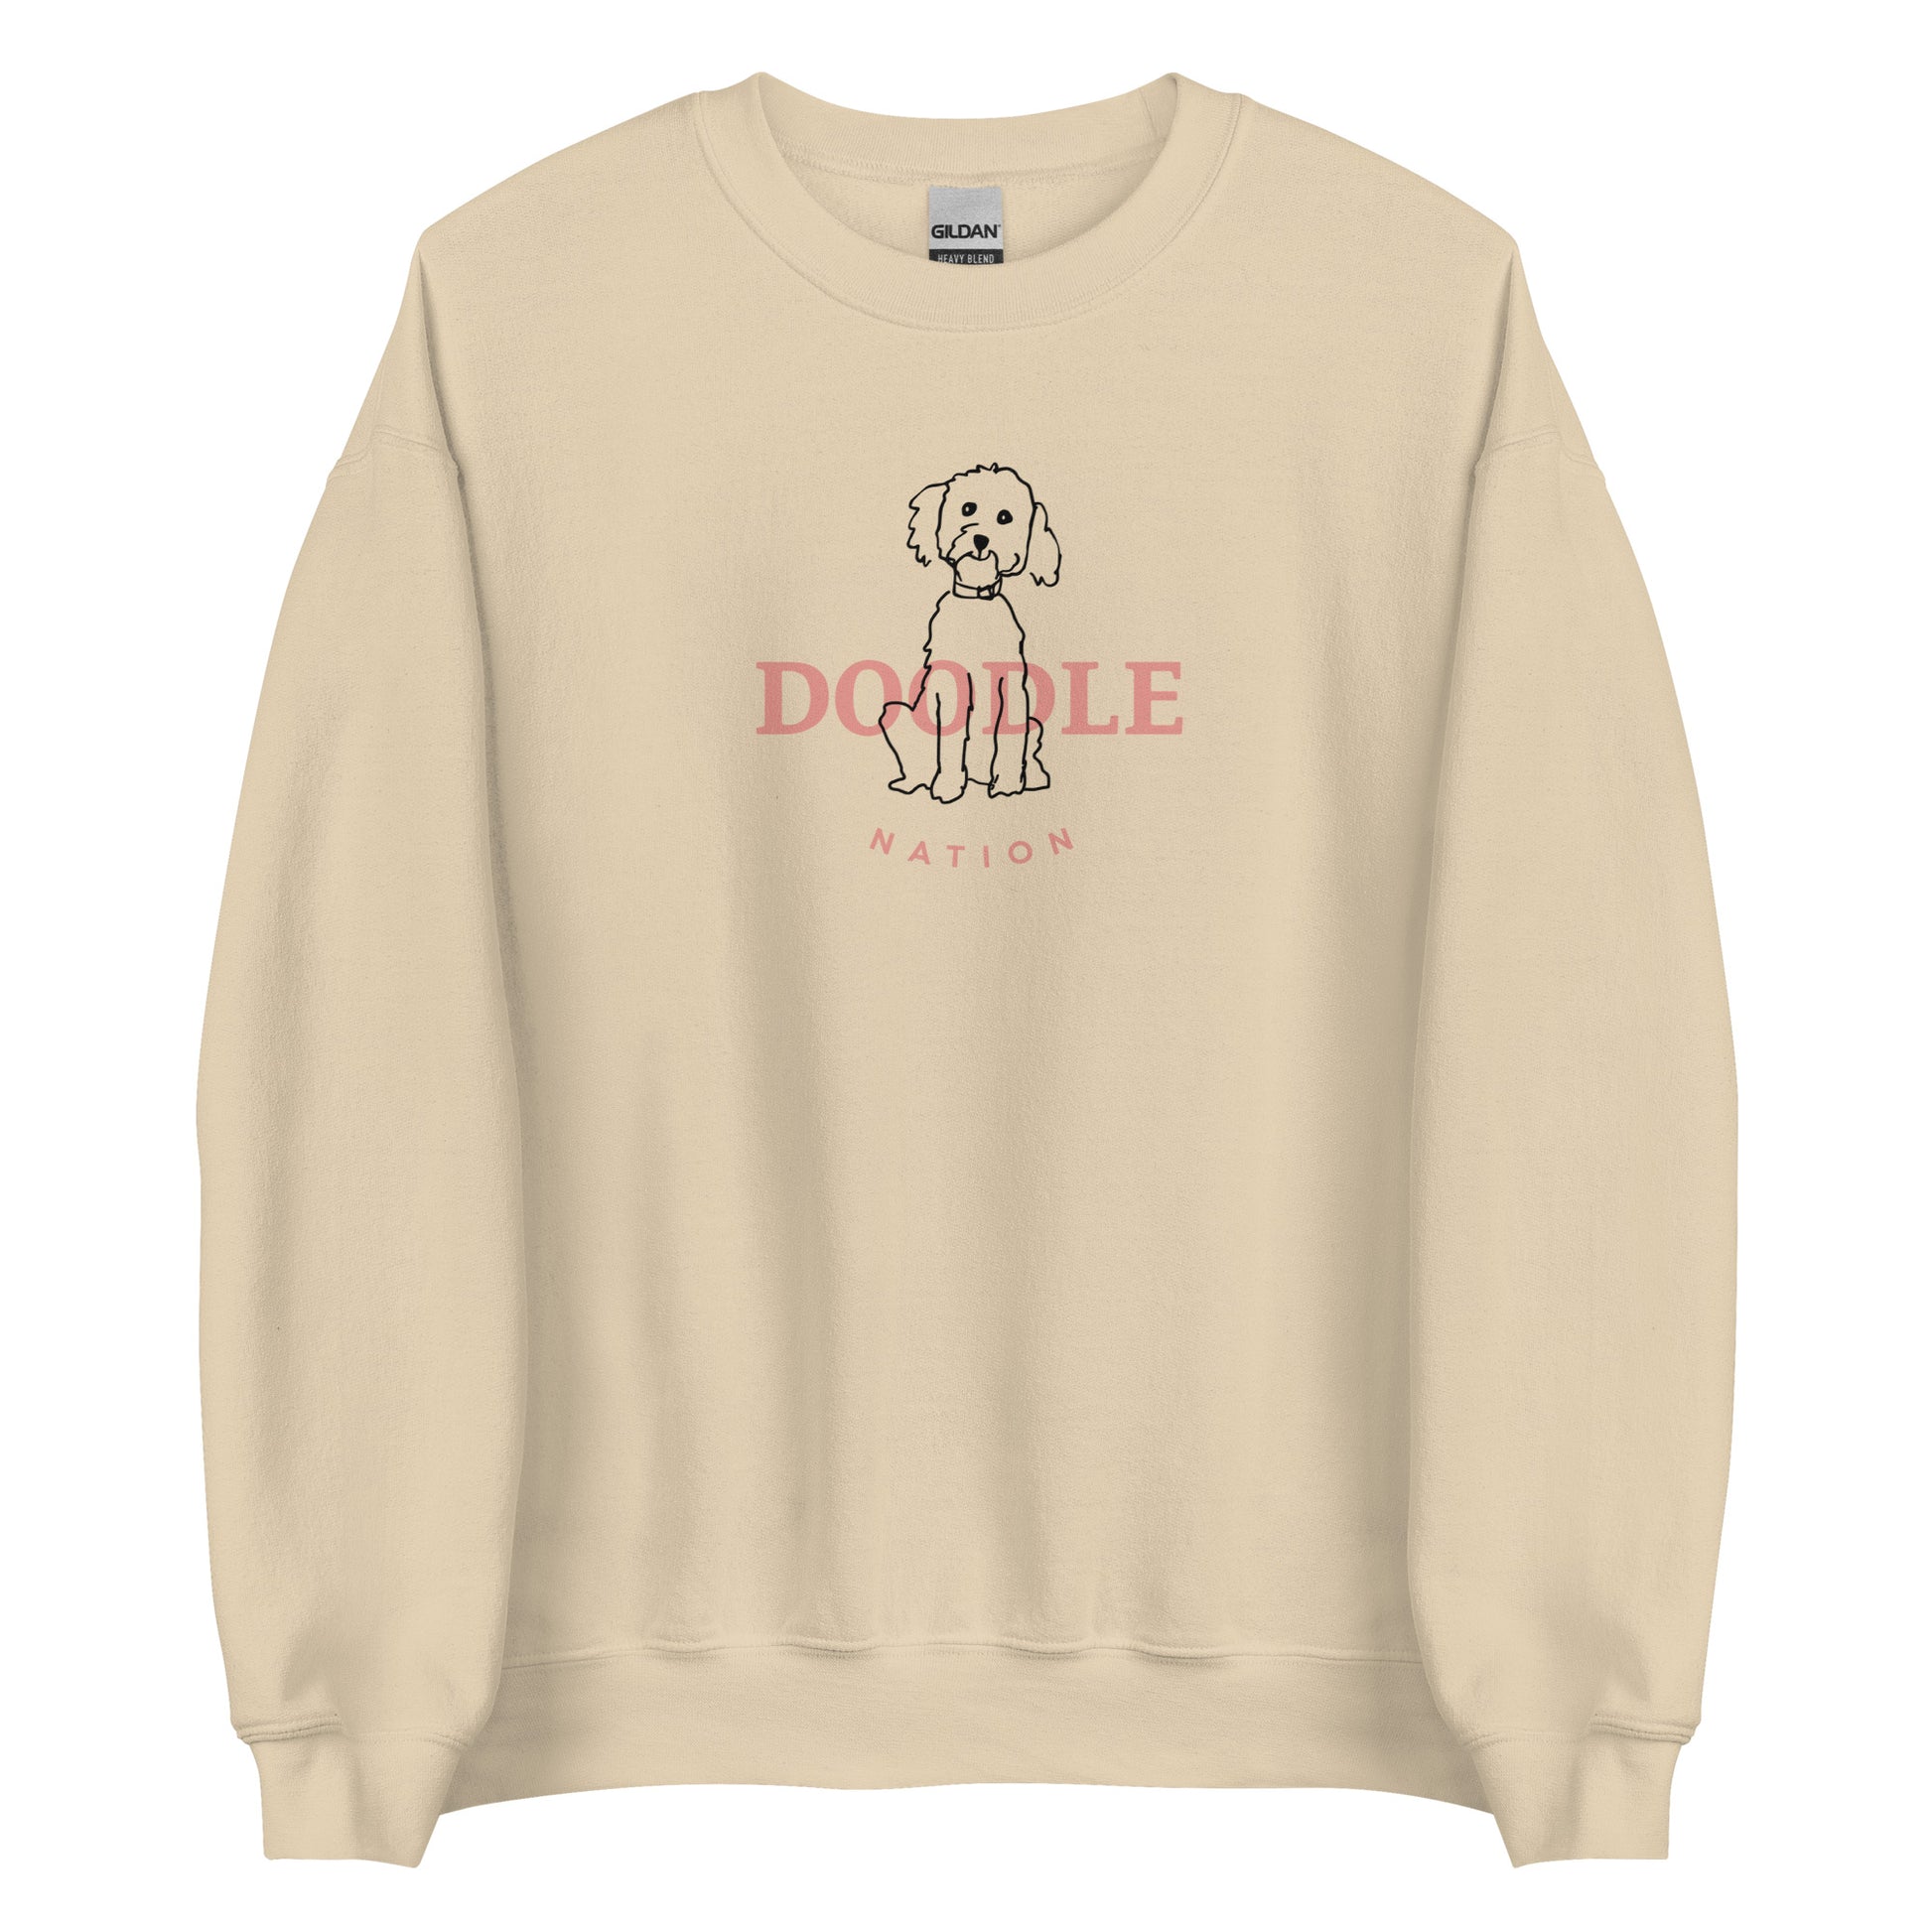 Goldendoodle crew neck sweatshirt with Goldendoodle and words "Doodle Nation" in sand color